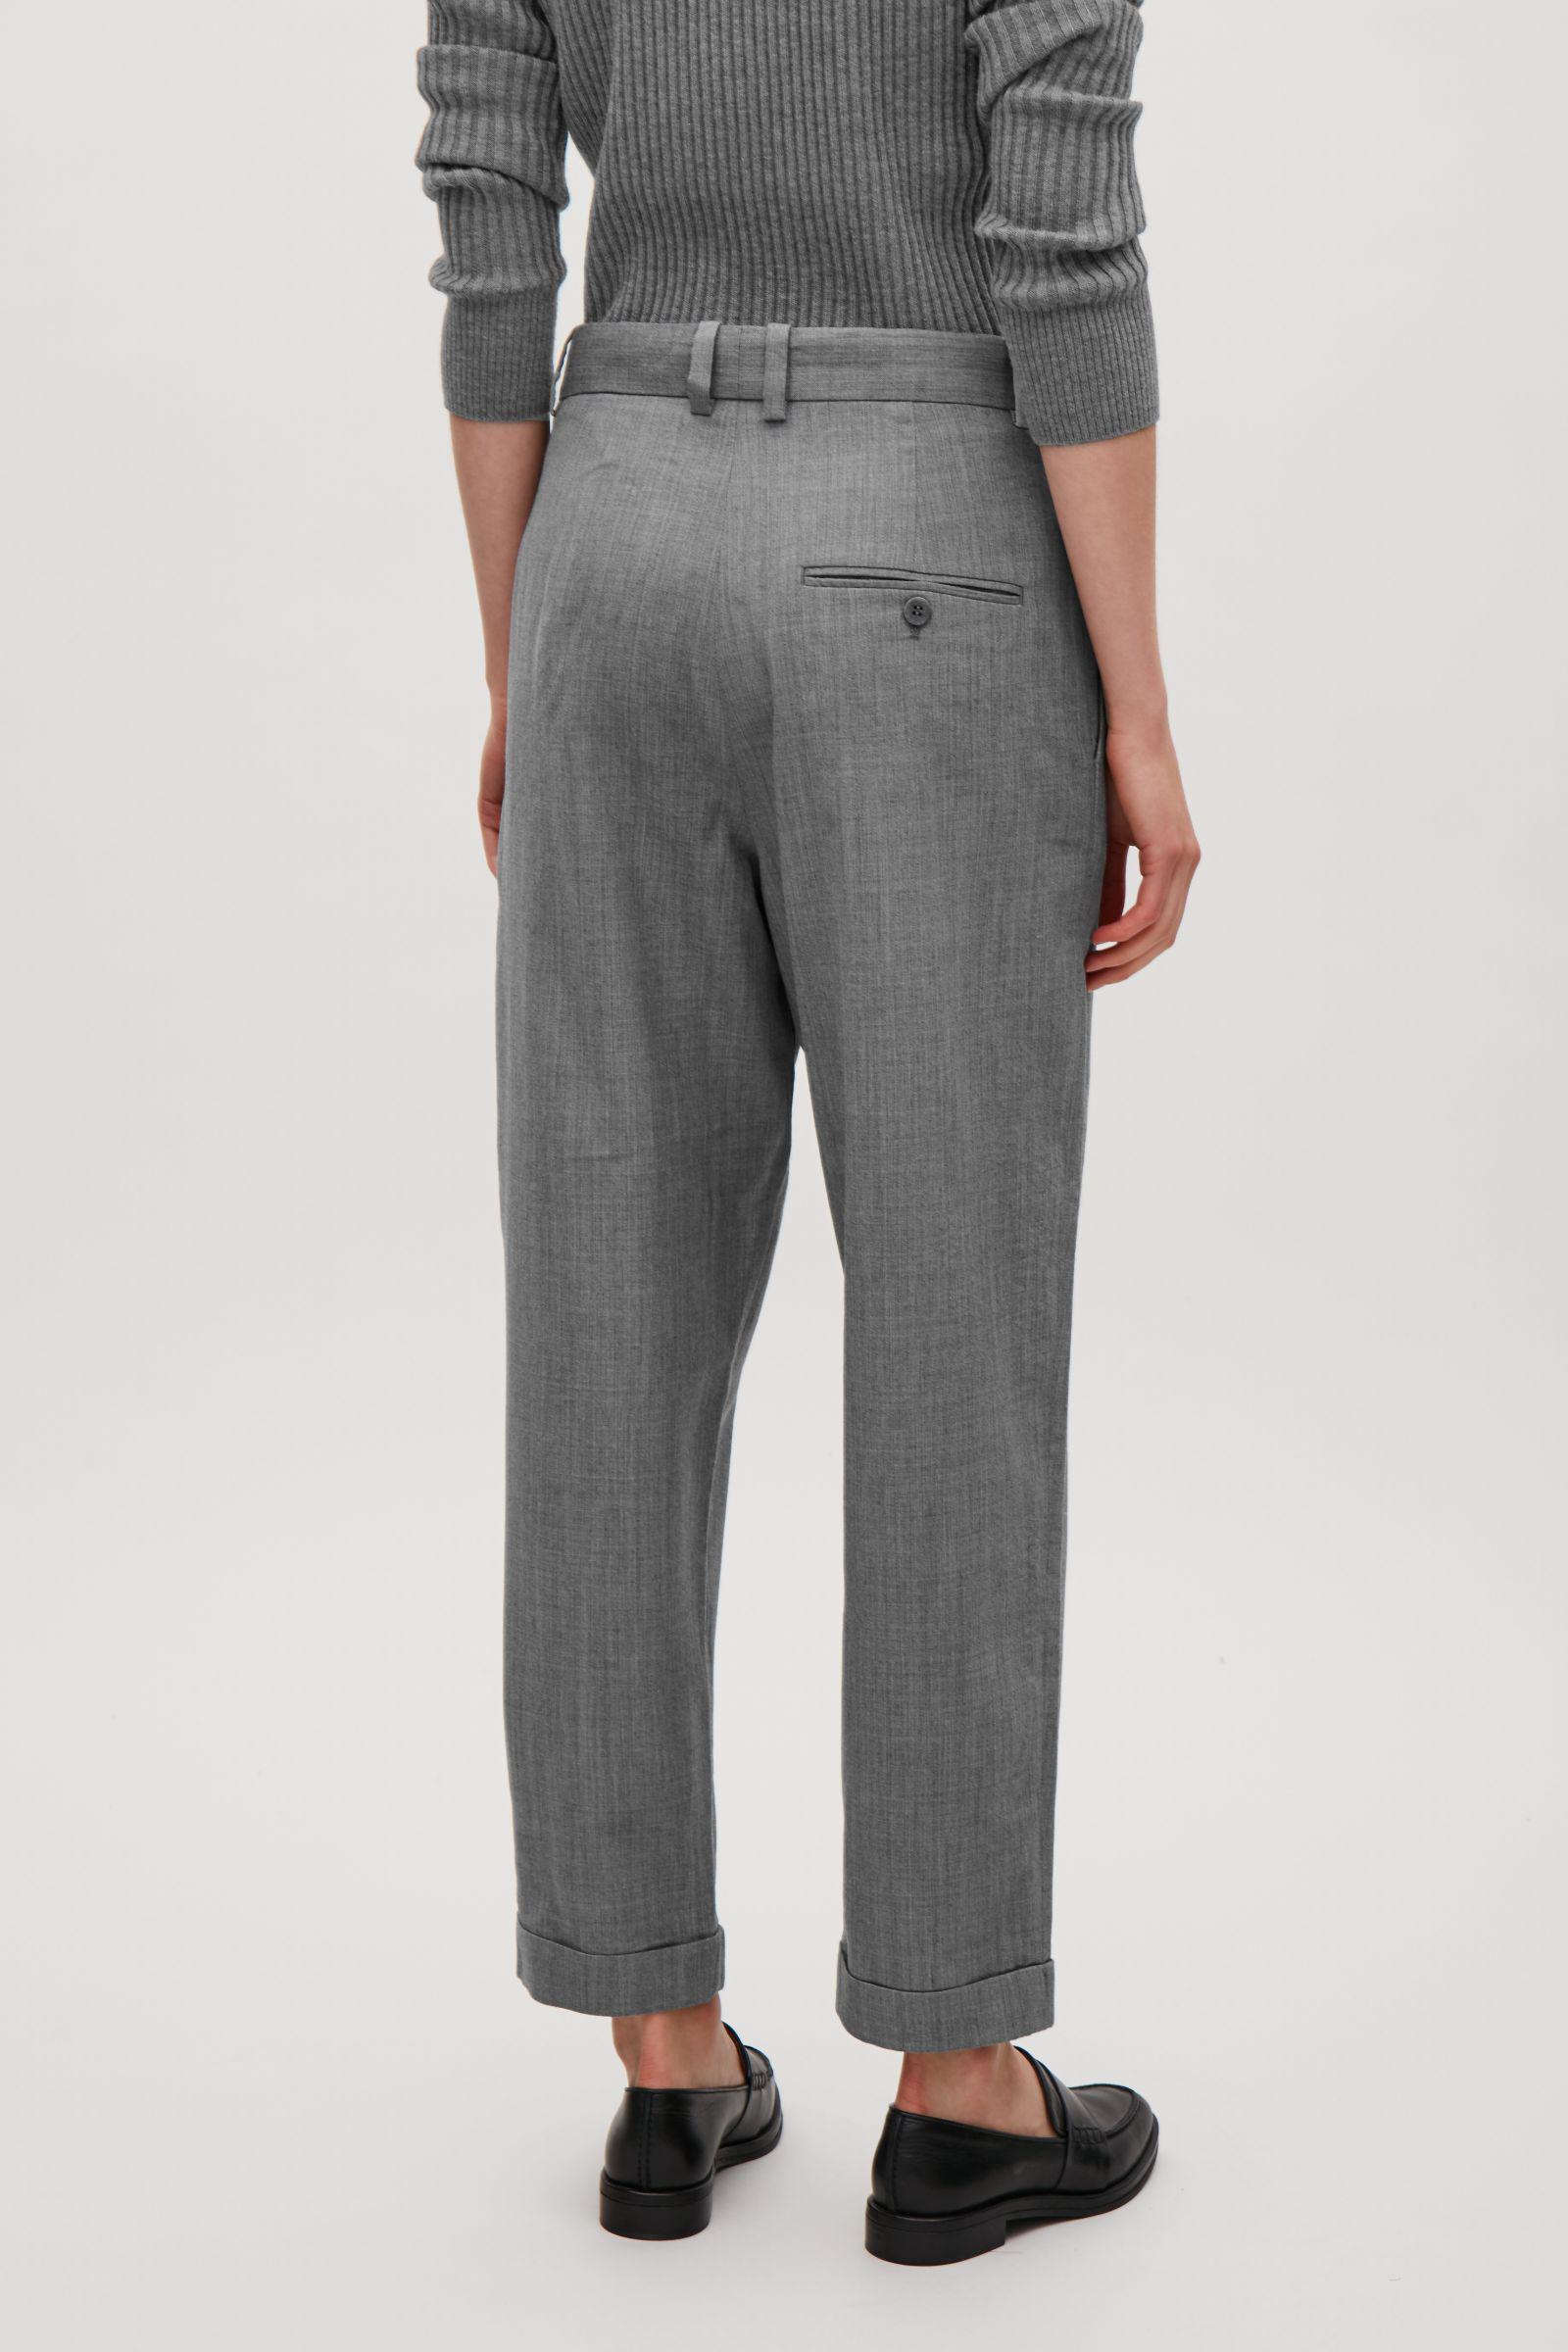 COS Wool Trousers With Turn-ups in Gray | Lyst